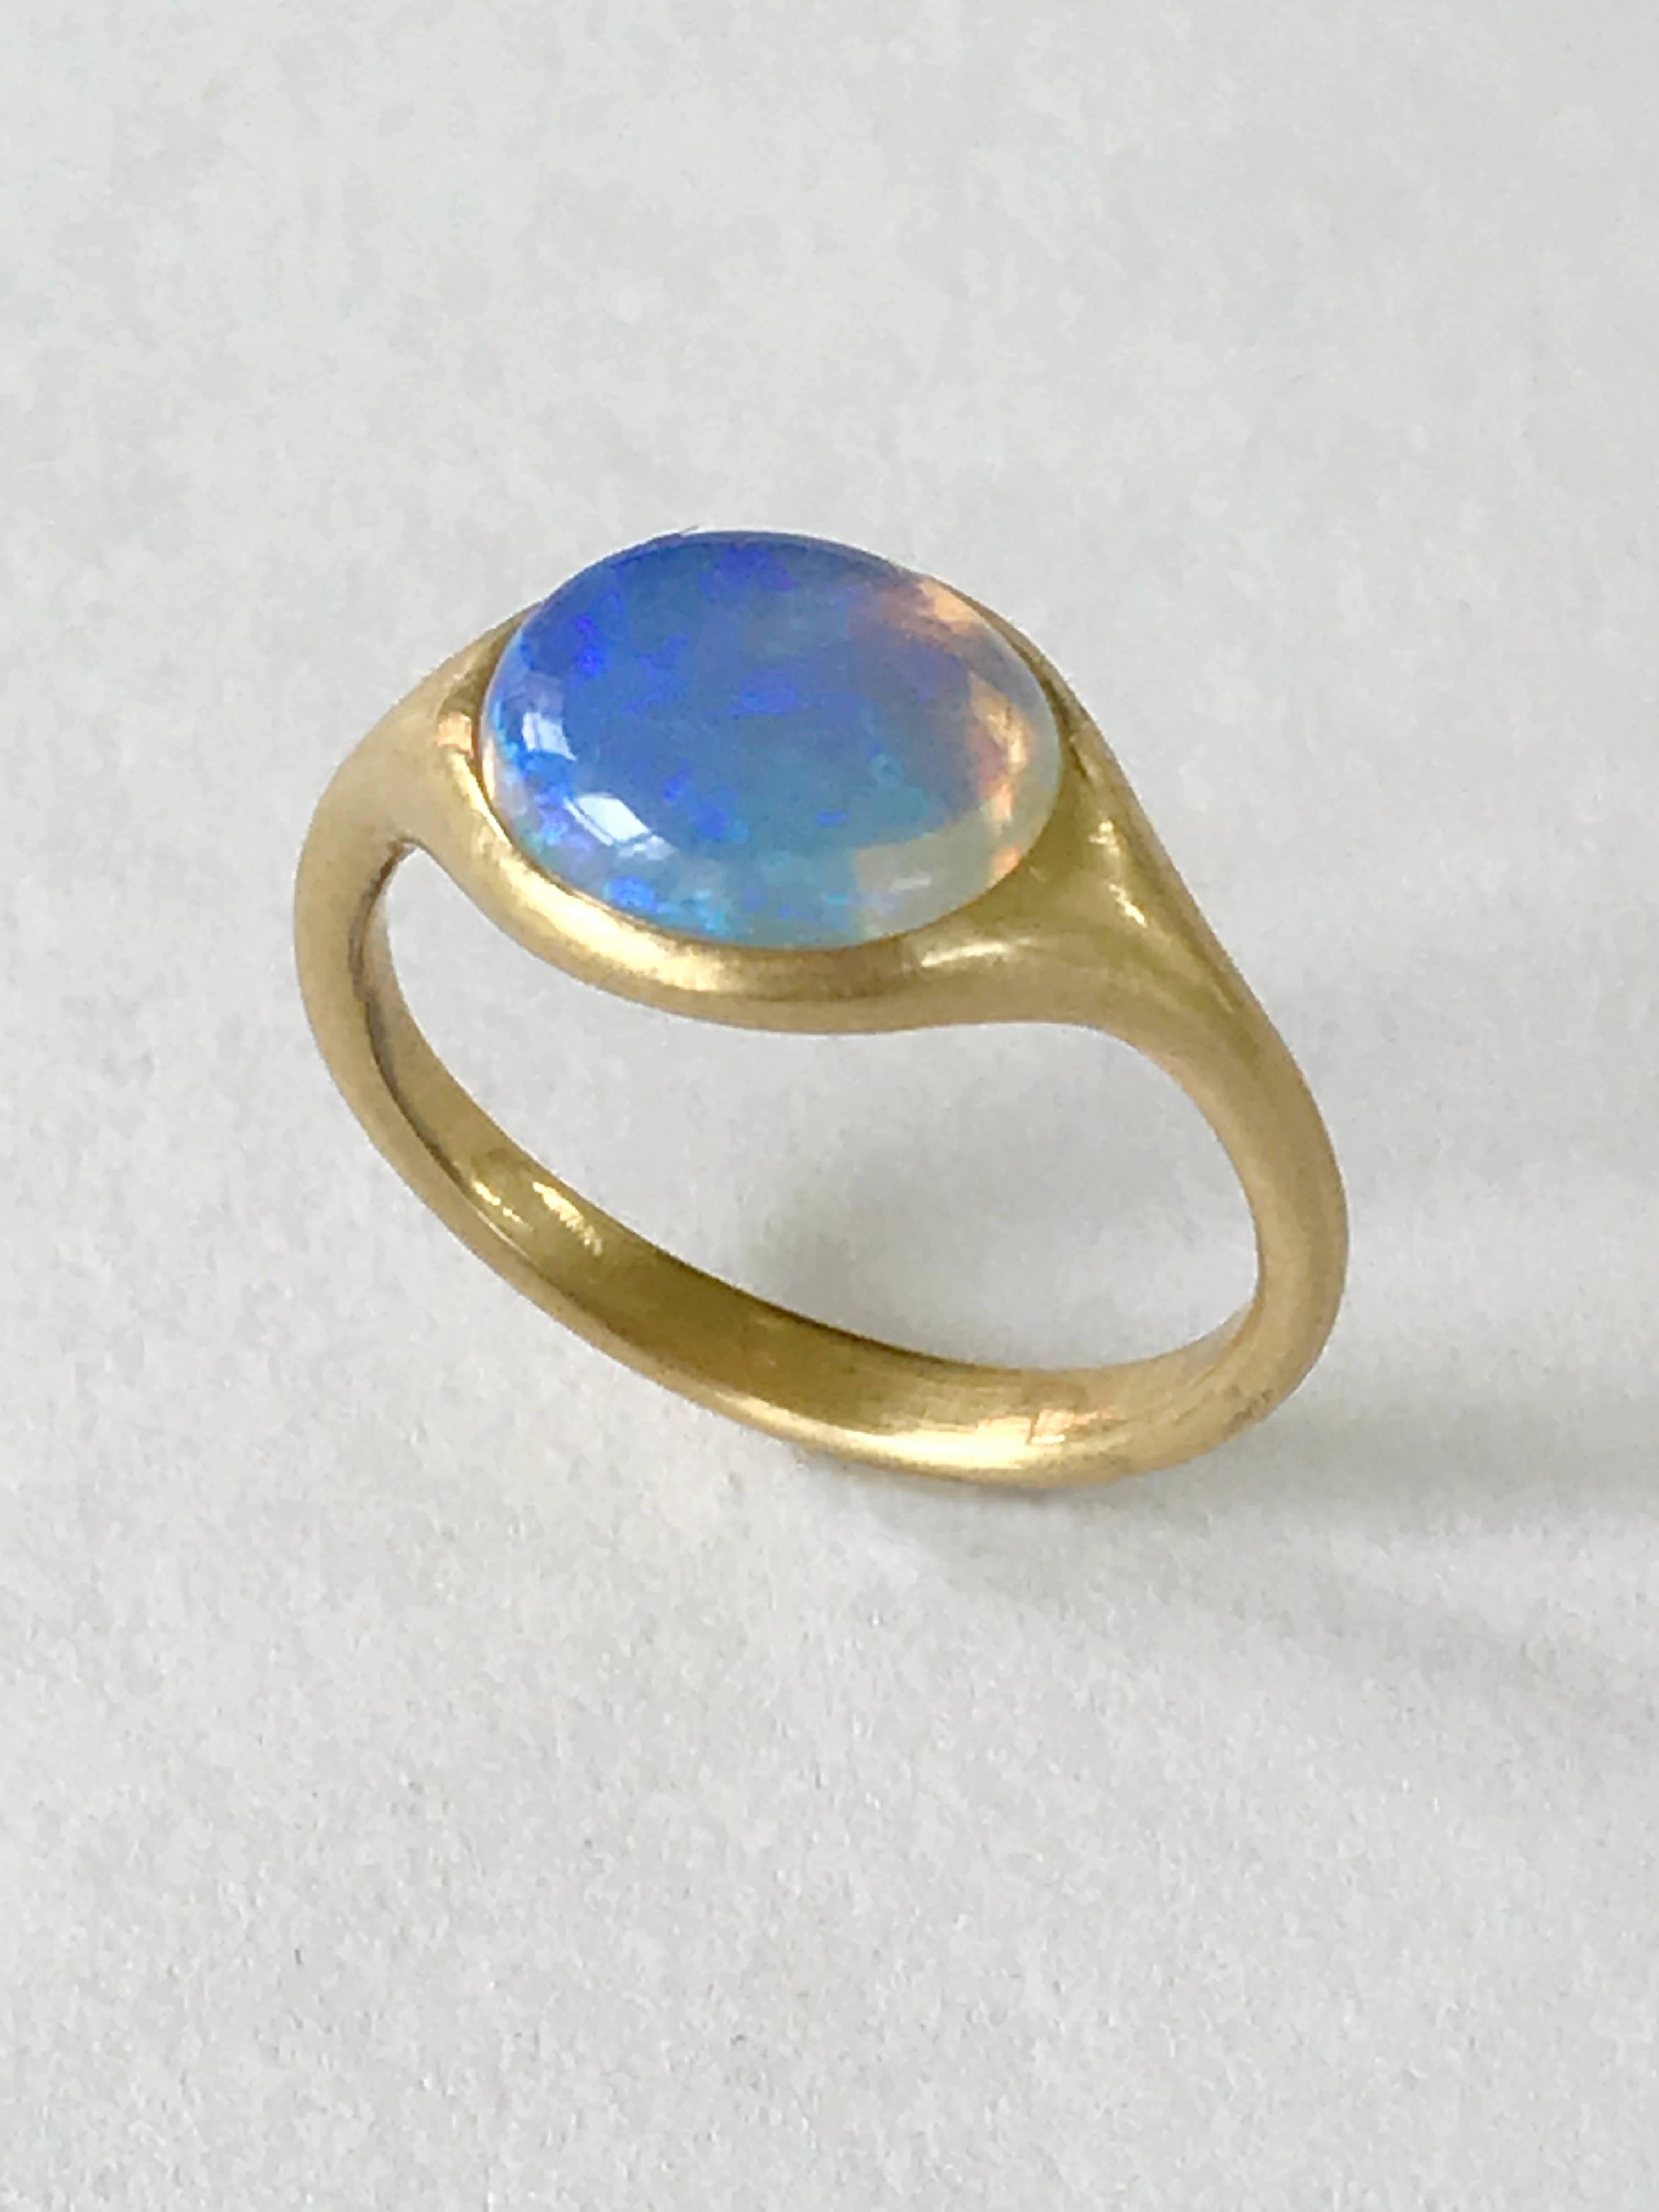 Dalben design 18k yellow gold semilucid finishing ring with a  1,78 carat bezel-set small oval cabochon Australian Opal .   
Ring size 5 3/4 - EU 51 re-sizable to most finger sizes. 
Opal dìimension : 10 x 8 mm 
Bezel setting dimension: 
width 11,6